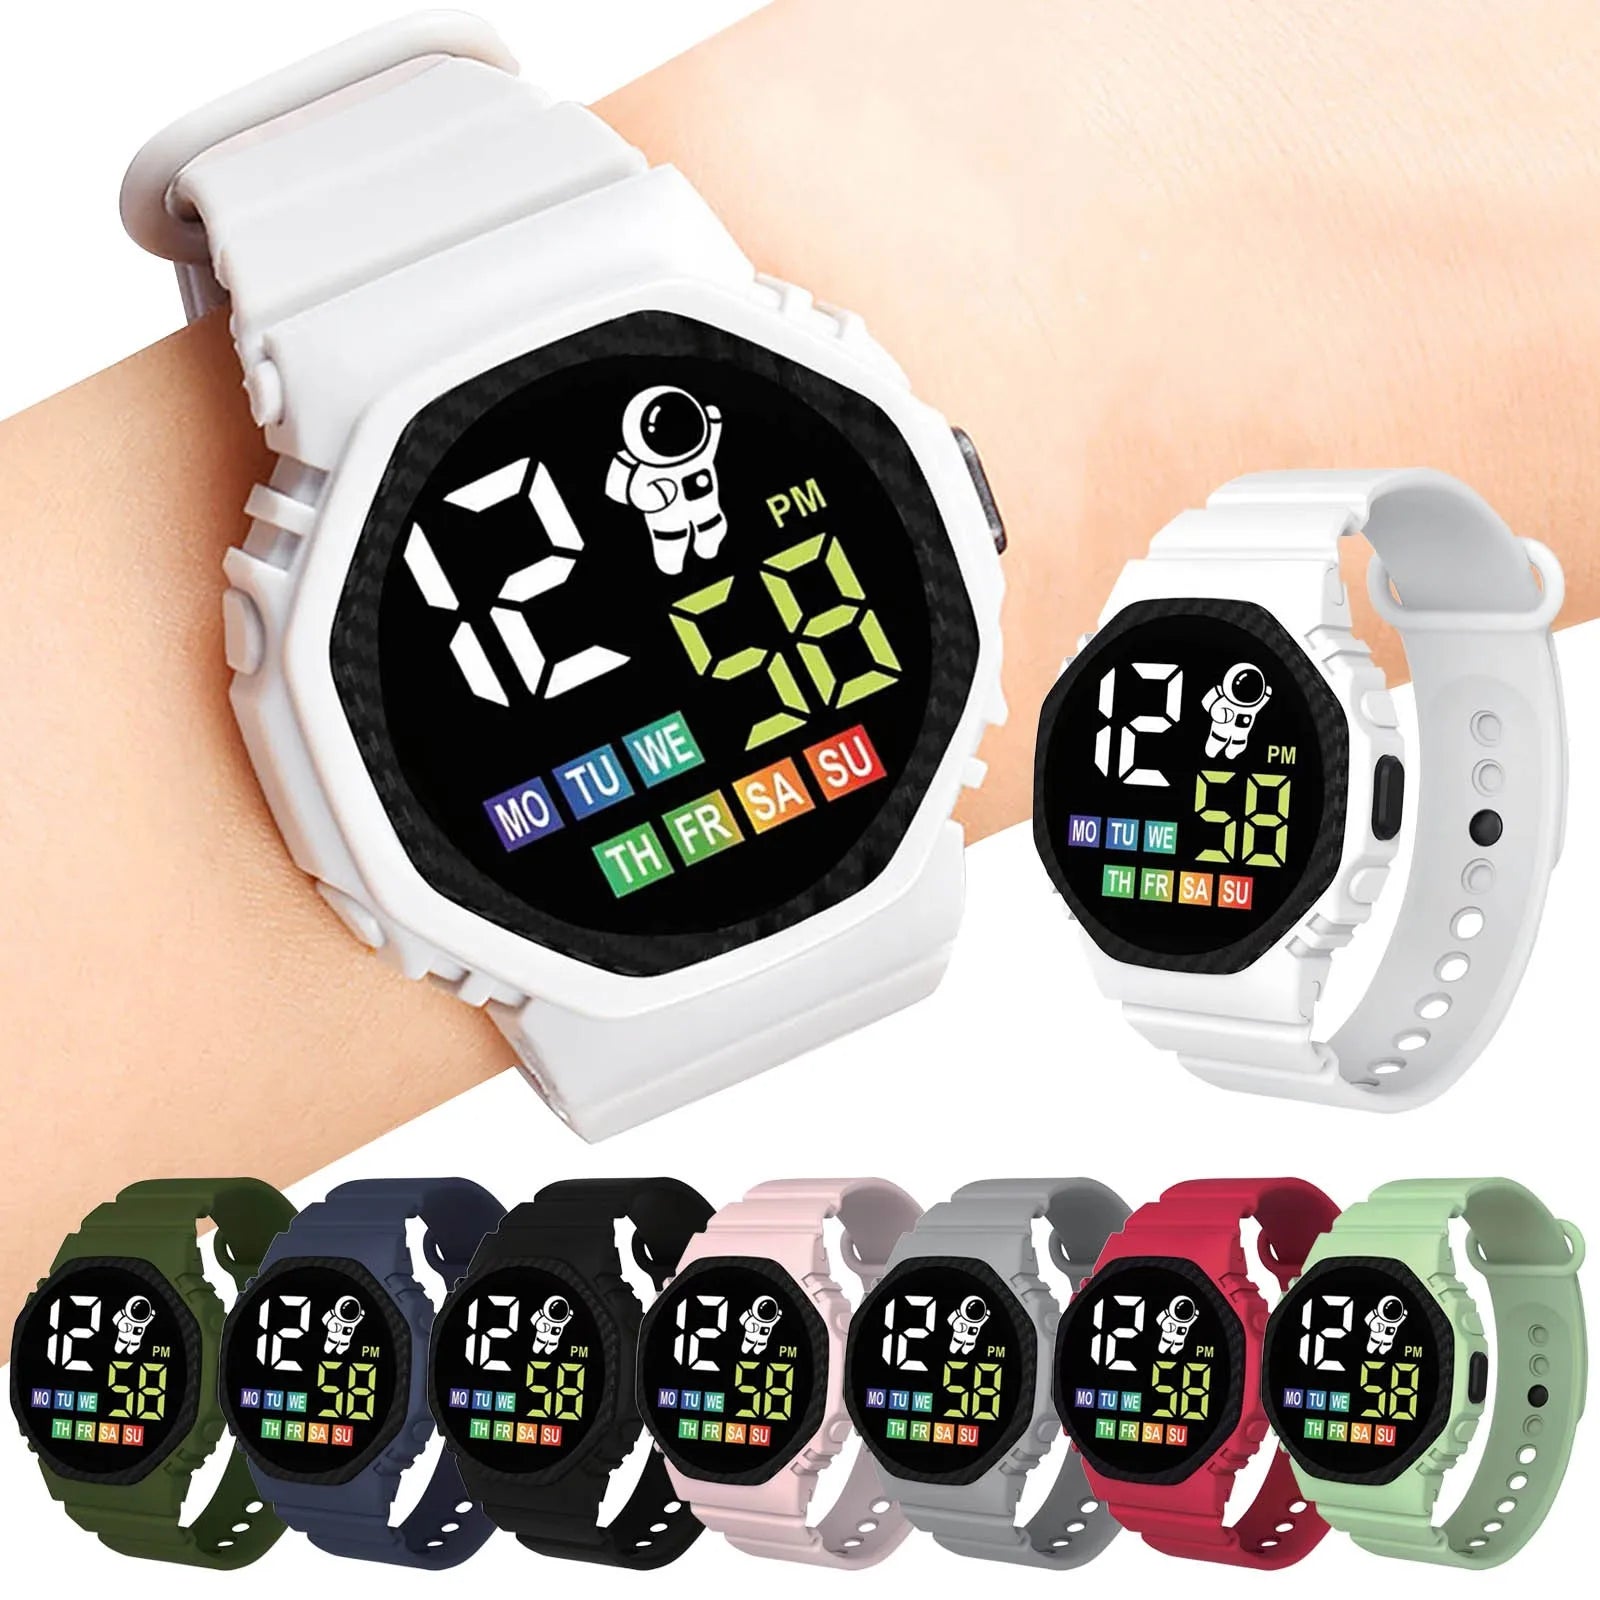 Waterproof Sports Watch For Kids Boy Girl Outdoor Silicone Strap Electronic Watches Children Students LED Digital Wristwatches